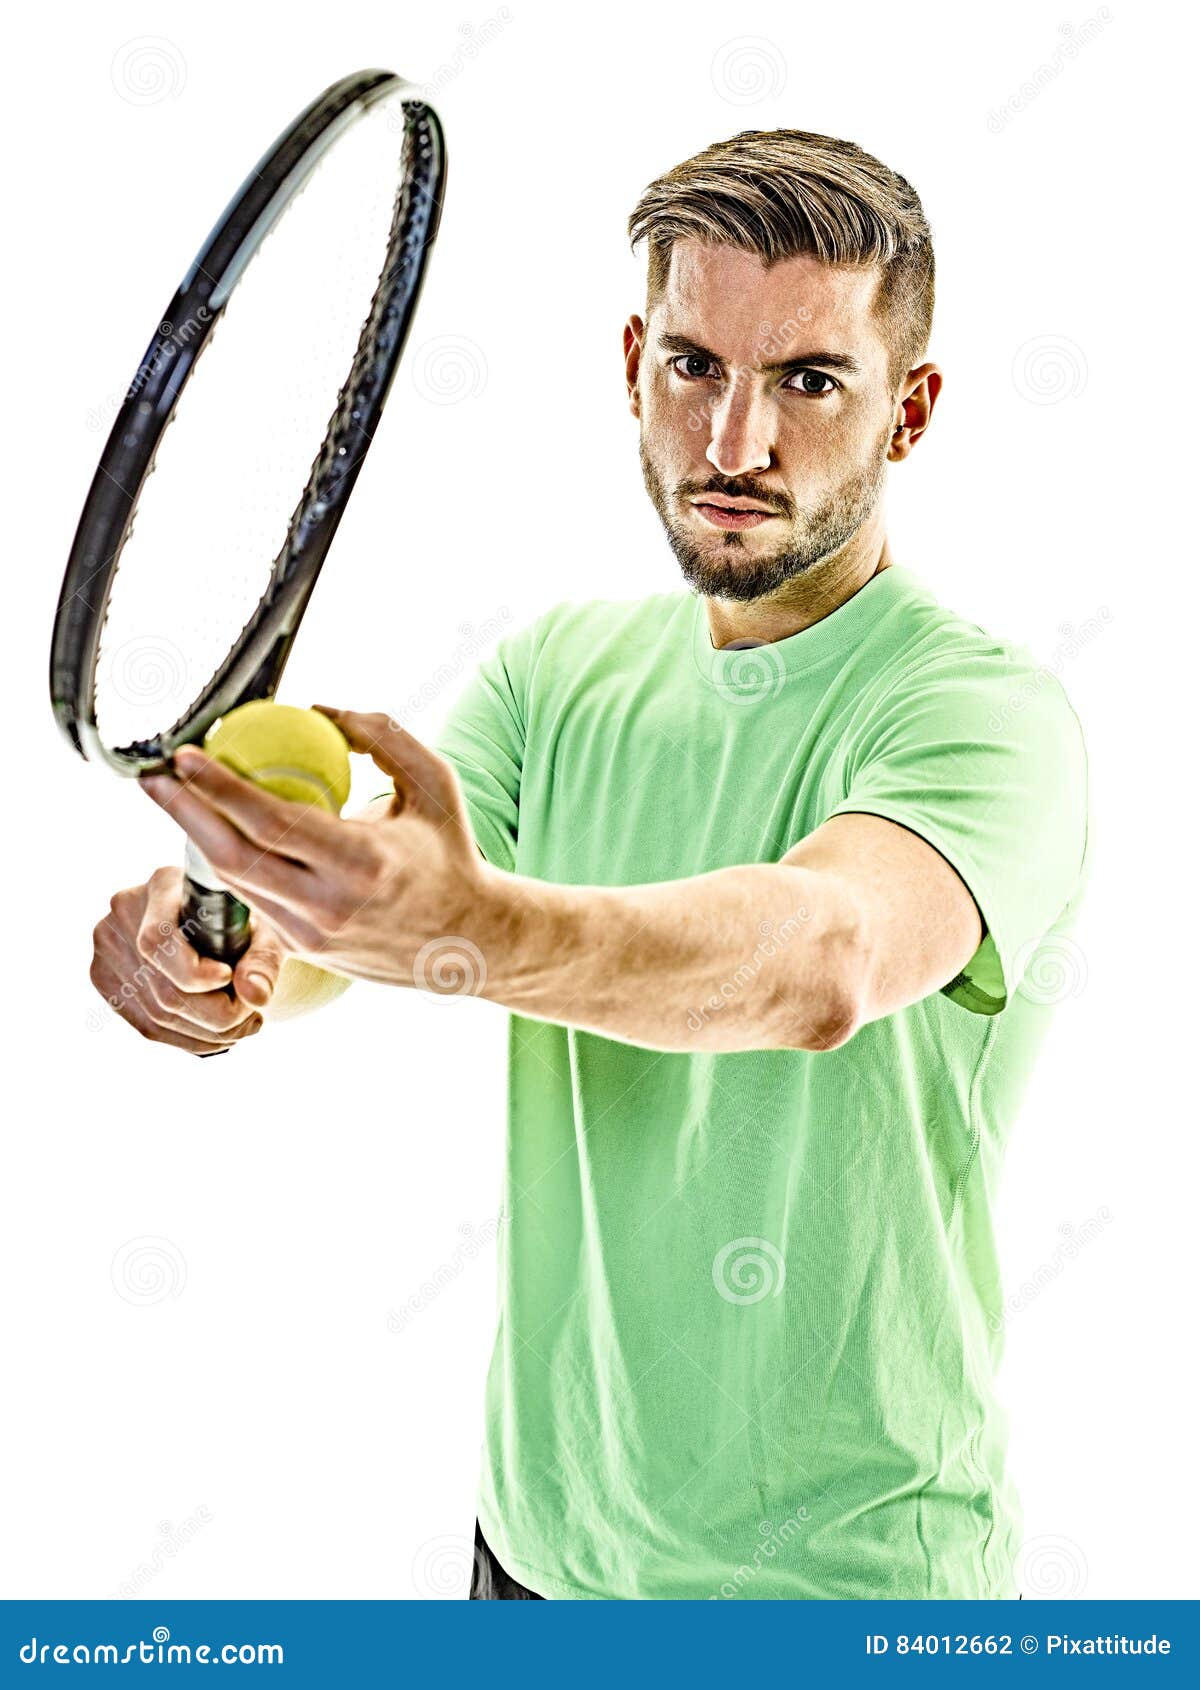 Tennis Player Service Serving Man Isolated Stock Photo - Image of ...